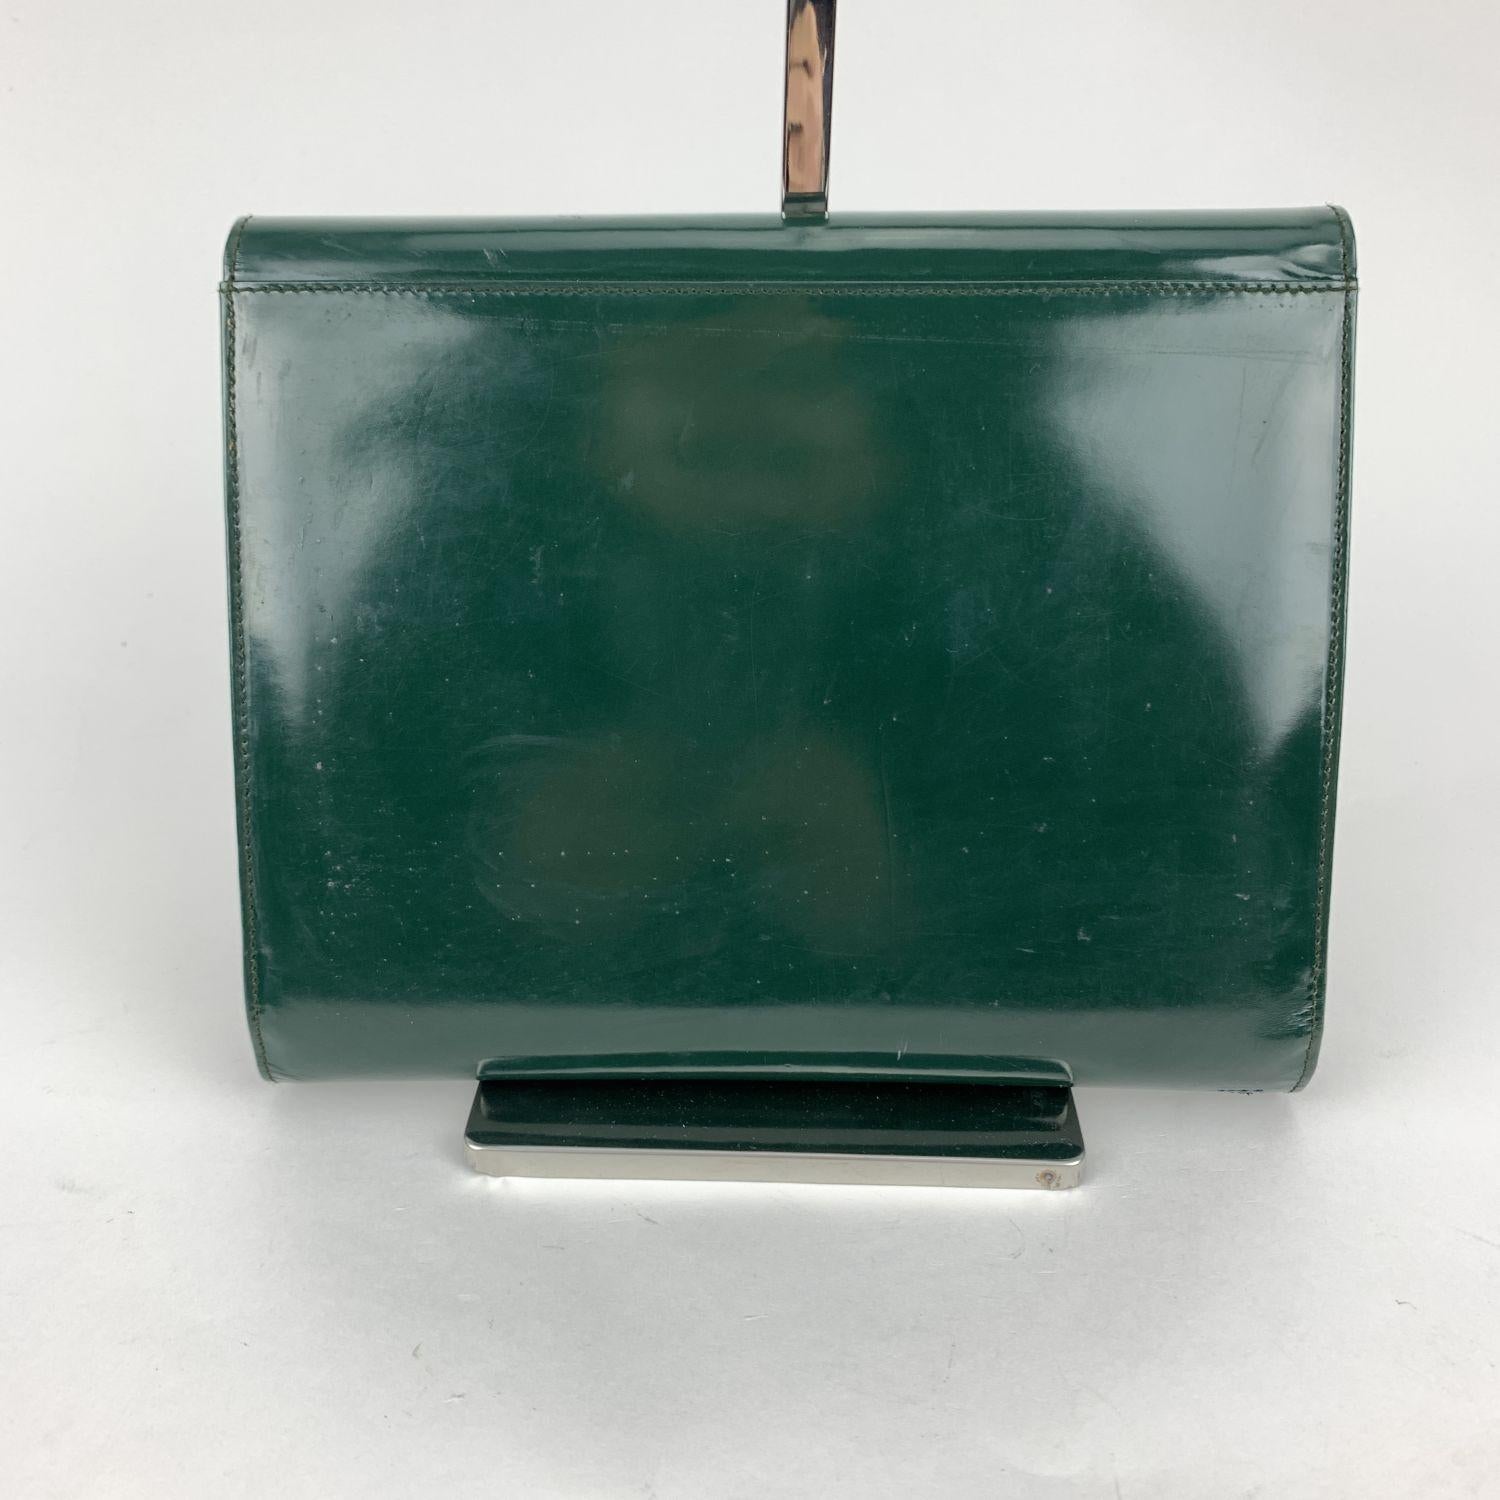 Vintage agenda cover by GUCCI crafted in green patent leather. Flap with button closure. Gold metal Gucci tab on the front. 2 slots for an agenda and a notebook inside. Pen holder inside. 'GUCCI - made in Italy' embossed inside. Measurements: 7 x